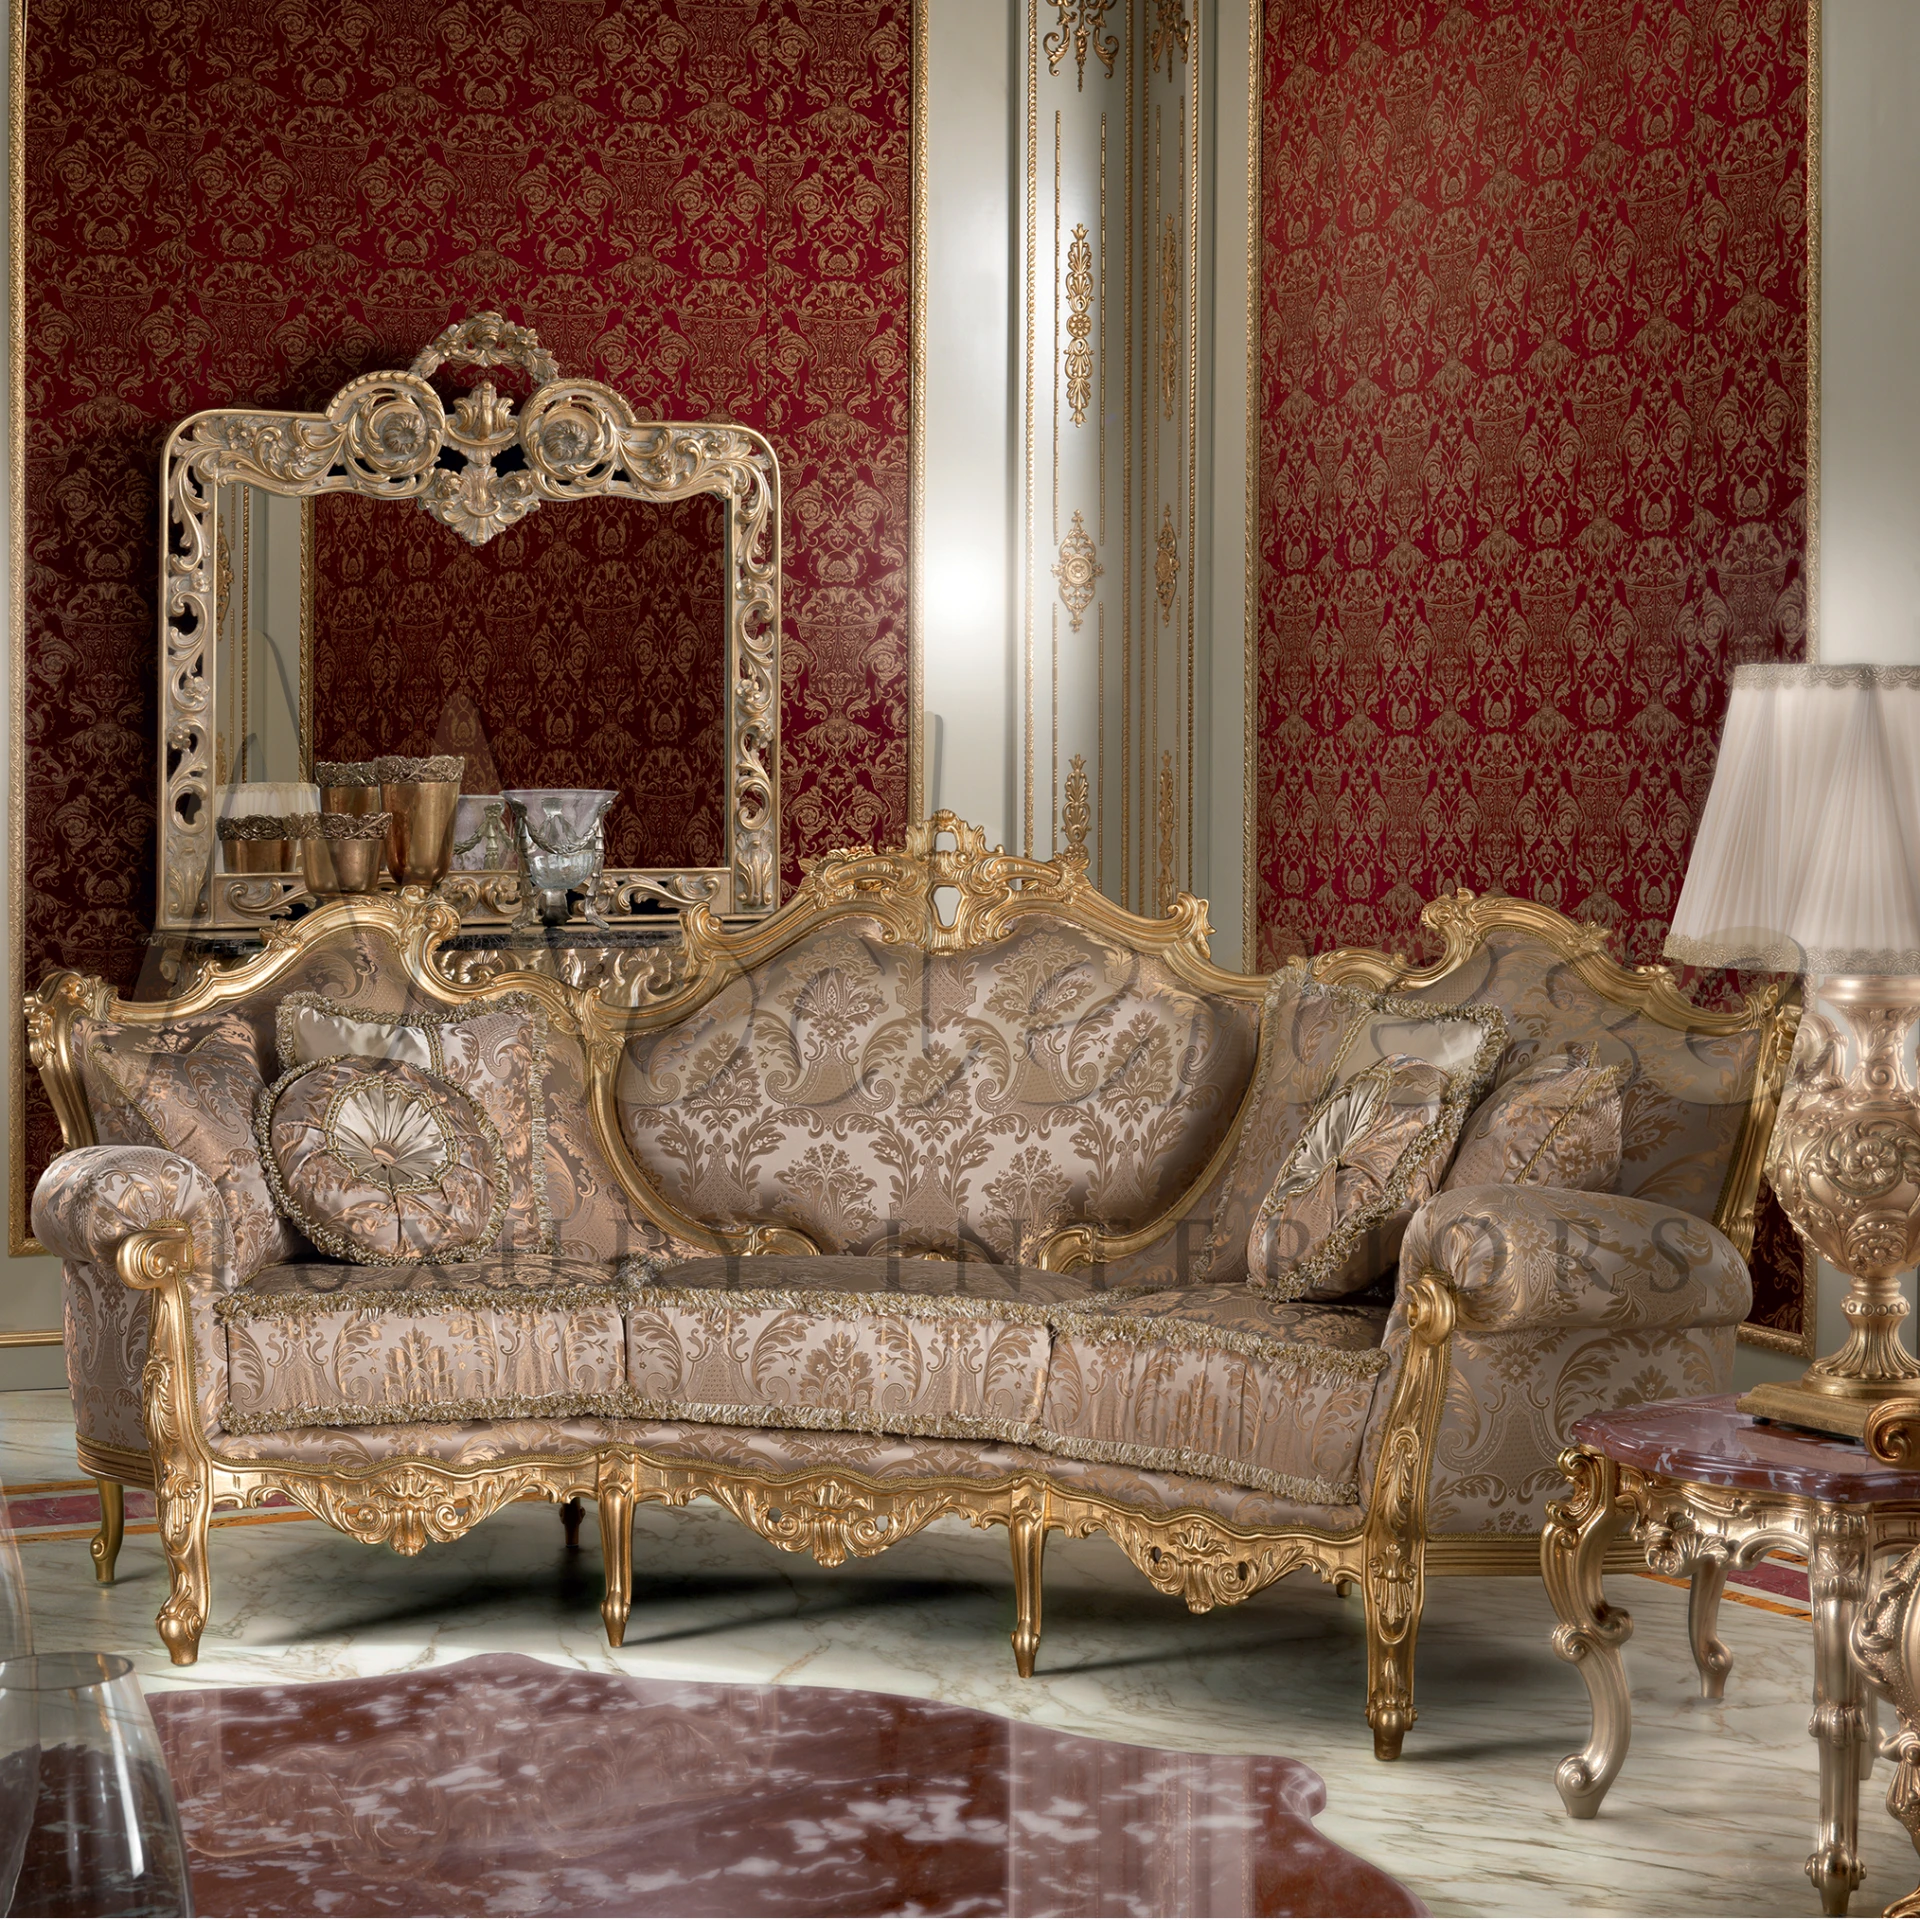 Handcrafted elegance in a Stunning Ornate Mirror, showcasing rococo flair and sophistication for classic home decor.